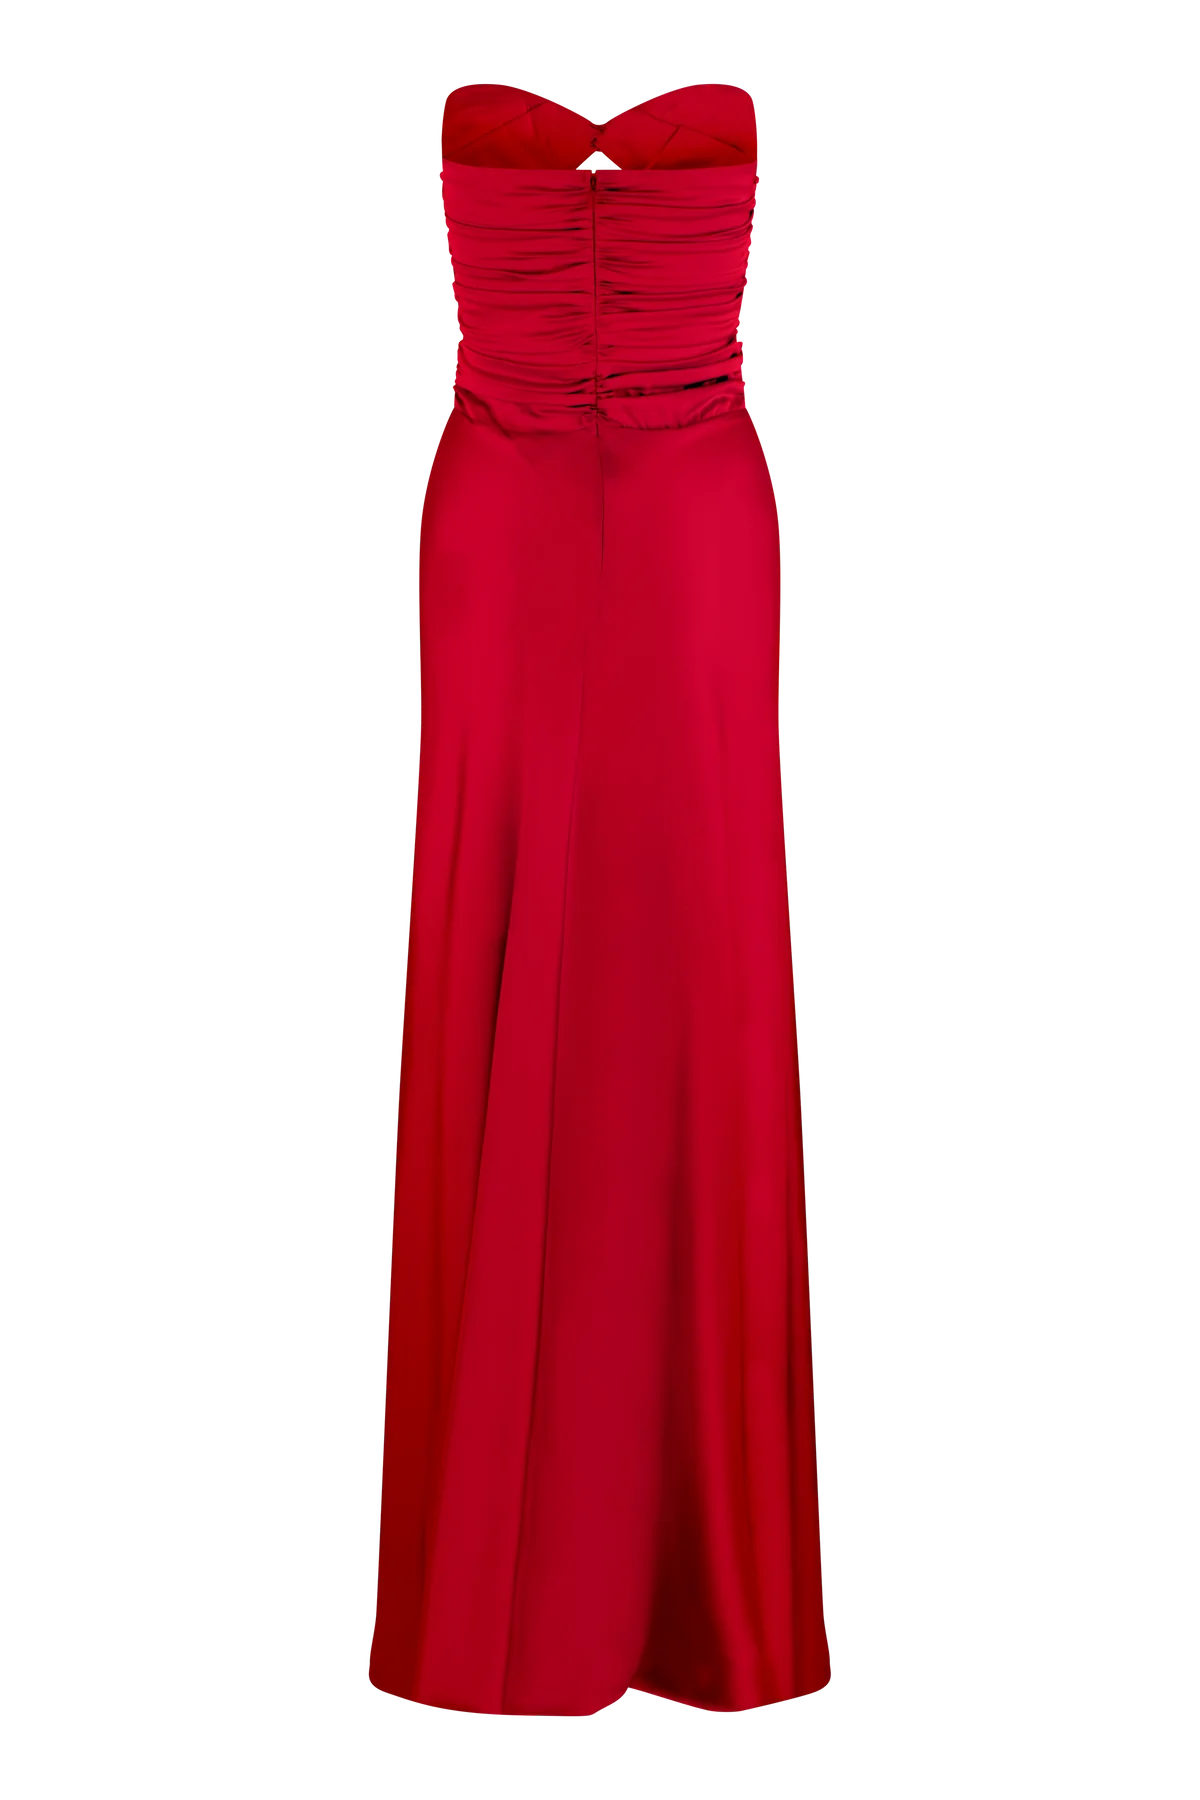 Hire HNTR Inka Gown in Wine Red